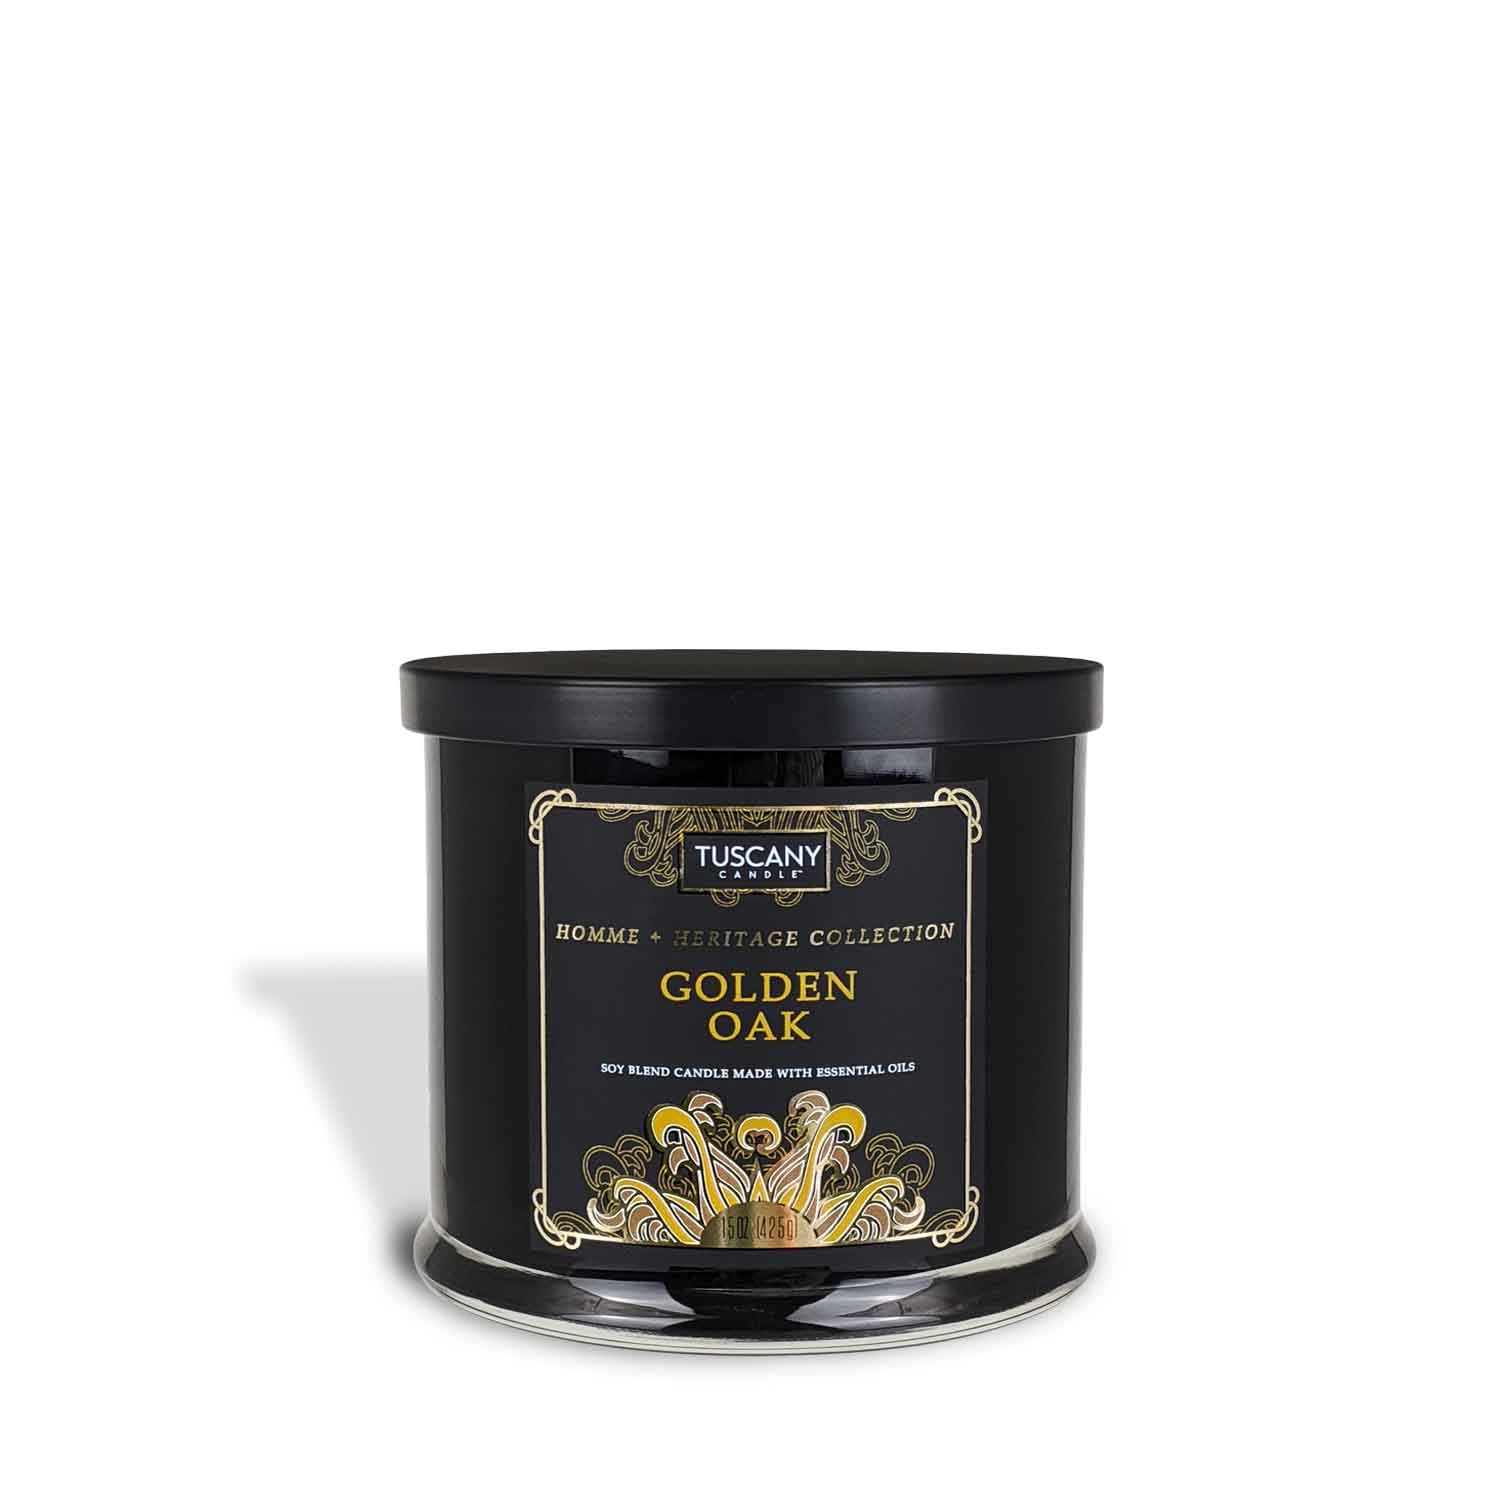 A black tin with a golden lid, filled with the warm and inviting scent of Mandarin and Golden Amber, balanced with notes of rich oakwood - Tuscany Candle's Golden Oak Scented Jar Candle (15 oz) from the Homme + Heritage Collection.